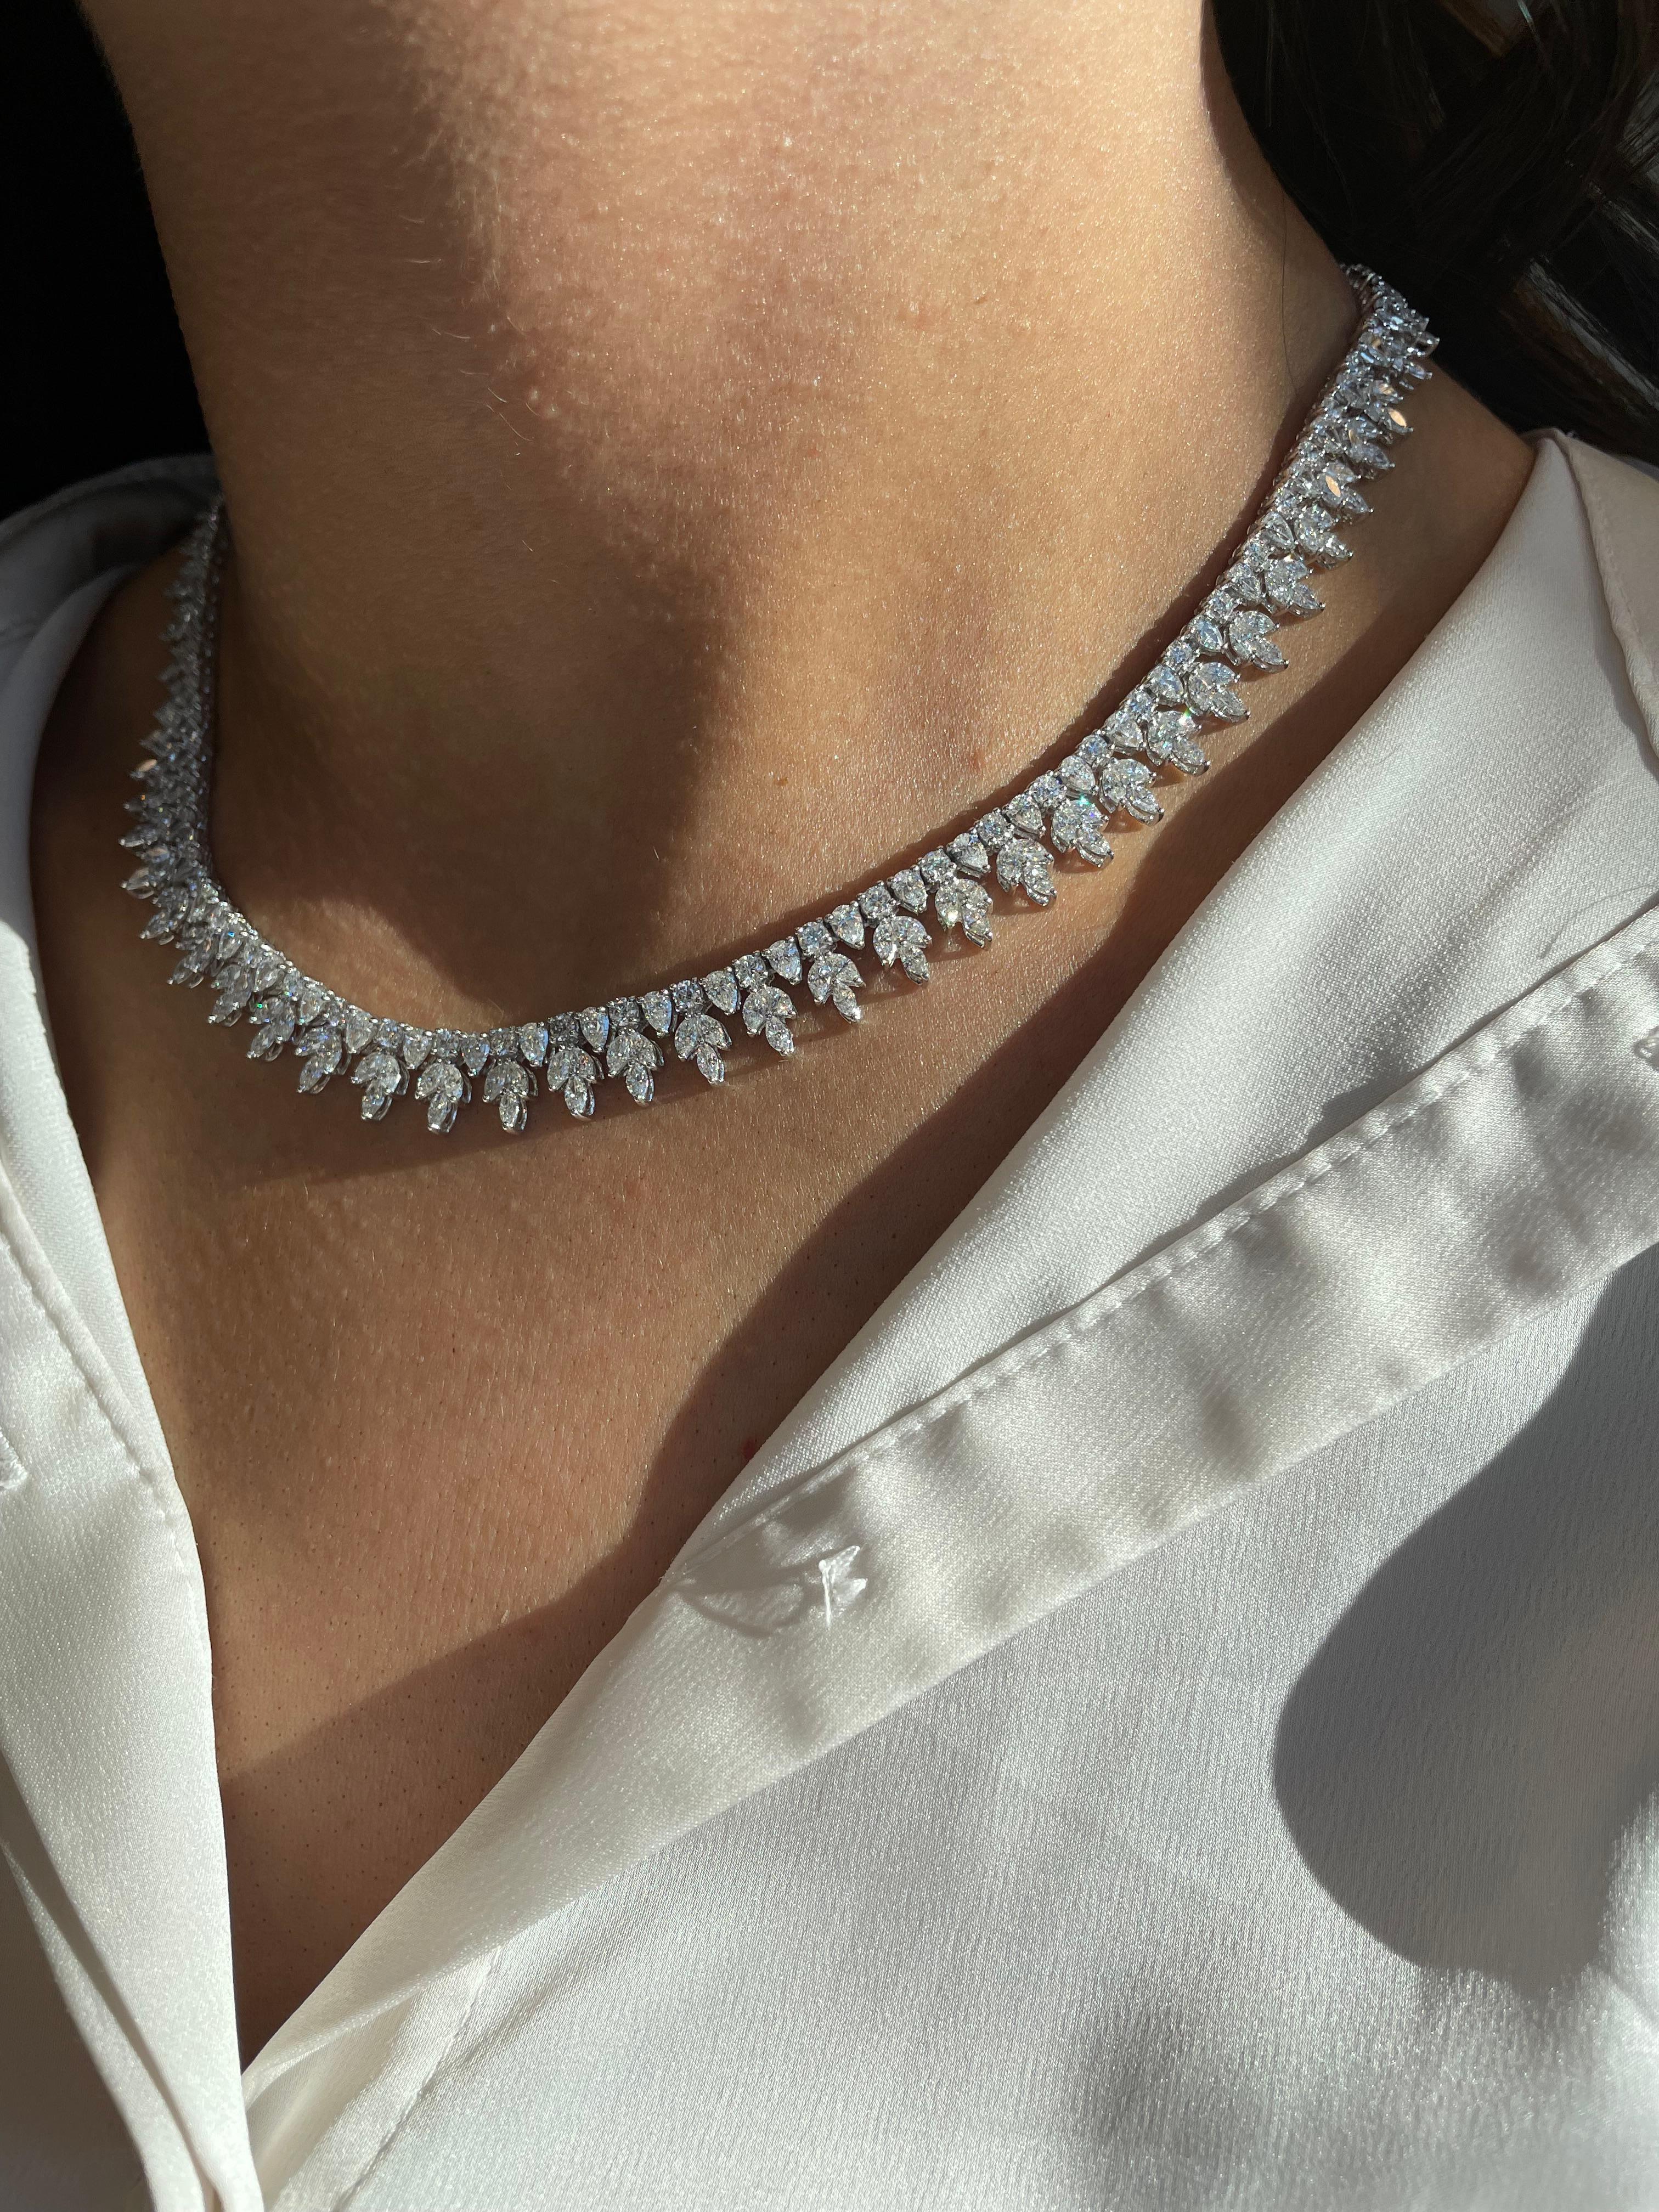 Exquisite multi diamond necklace. Perfect as a wedding / bridal necklace. High jewelry by Alexander Beverly Hills.
335 round, marques, and pear cut diamonds, 19.74 carats total. Approximately G/H color and VS clarity. Four prong set in 18k white